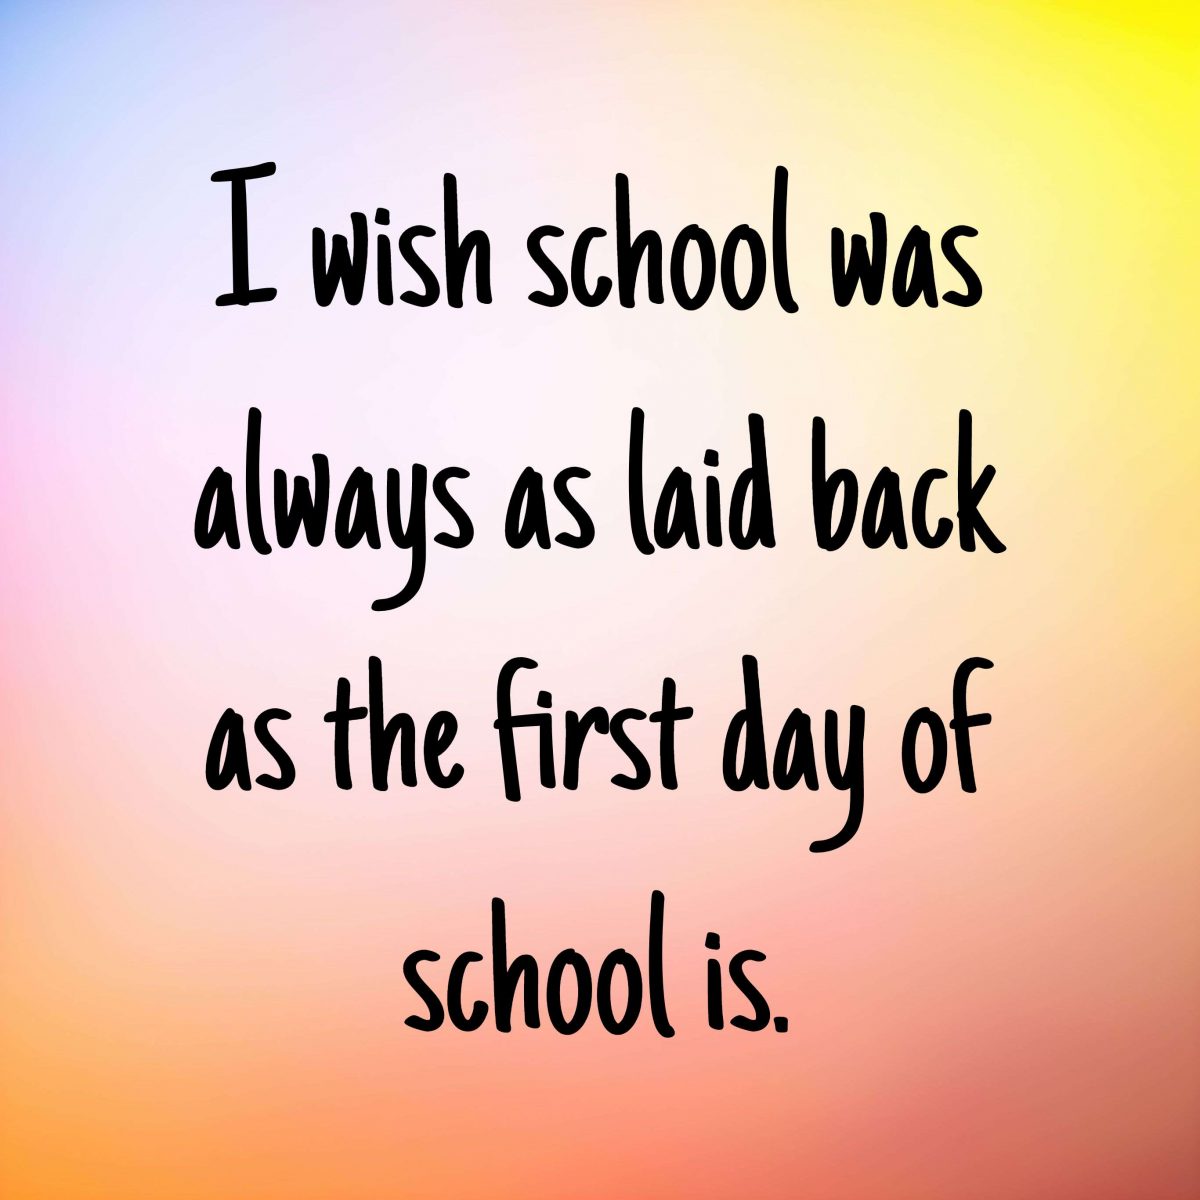 First Day of School Quotes | Text & Image Quotes | QuoteReel